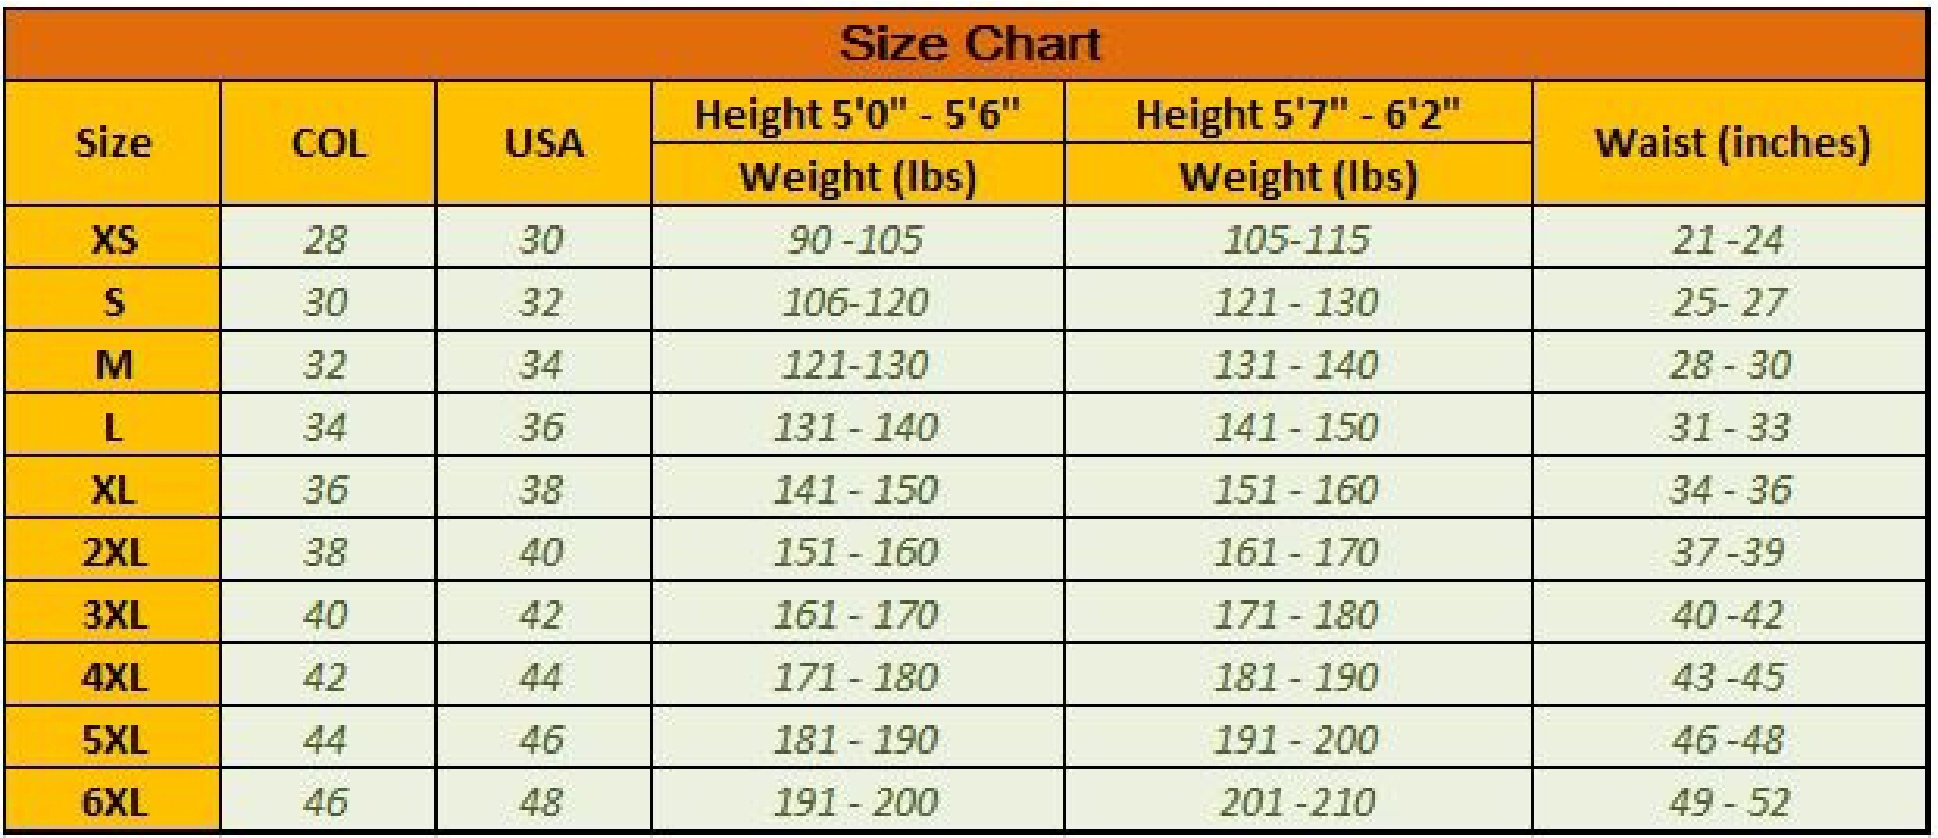 Height And Weight Size Chart